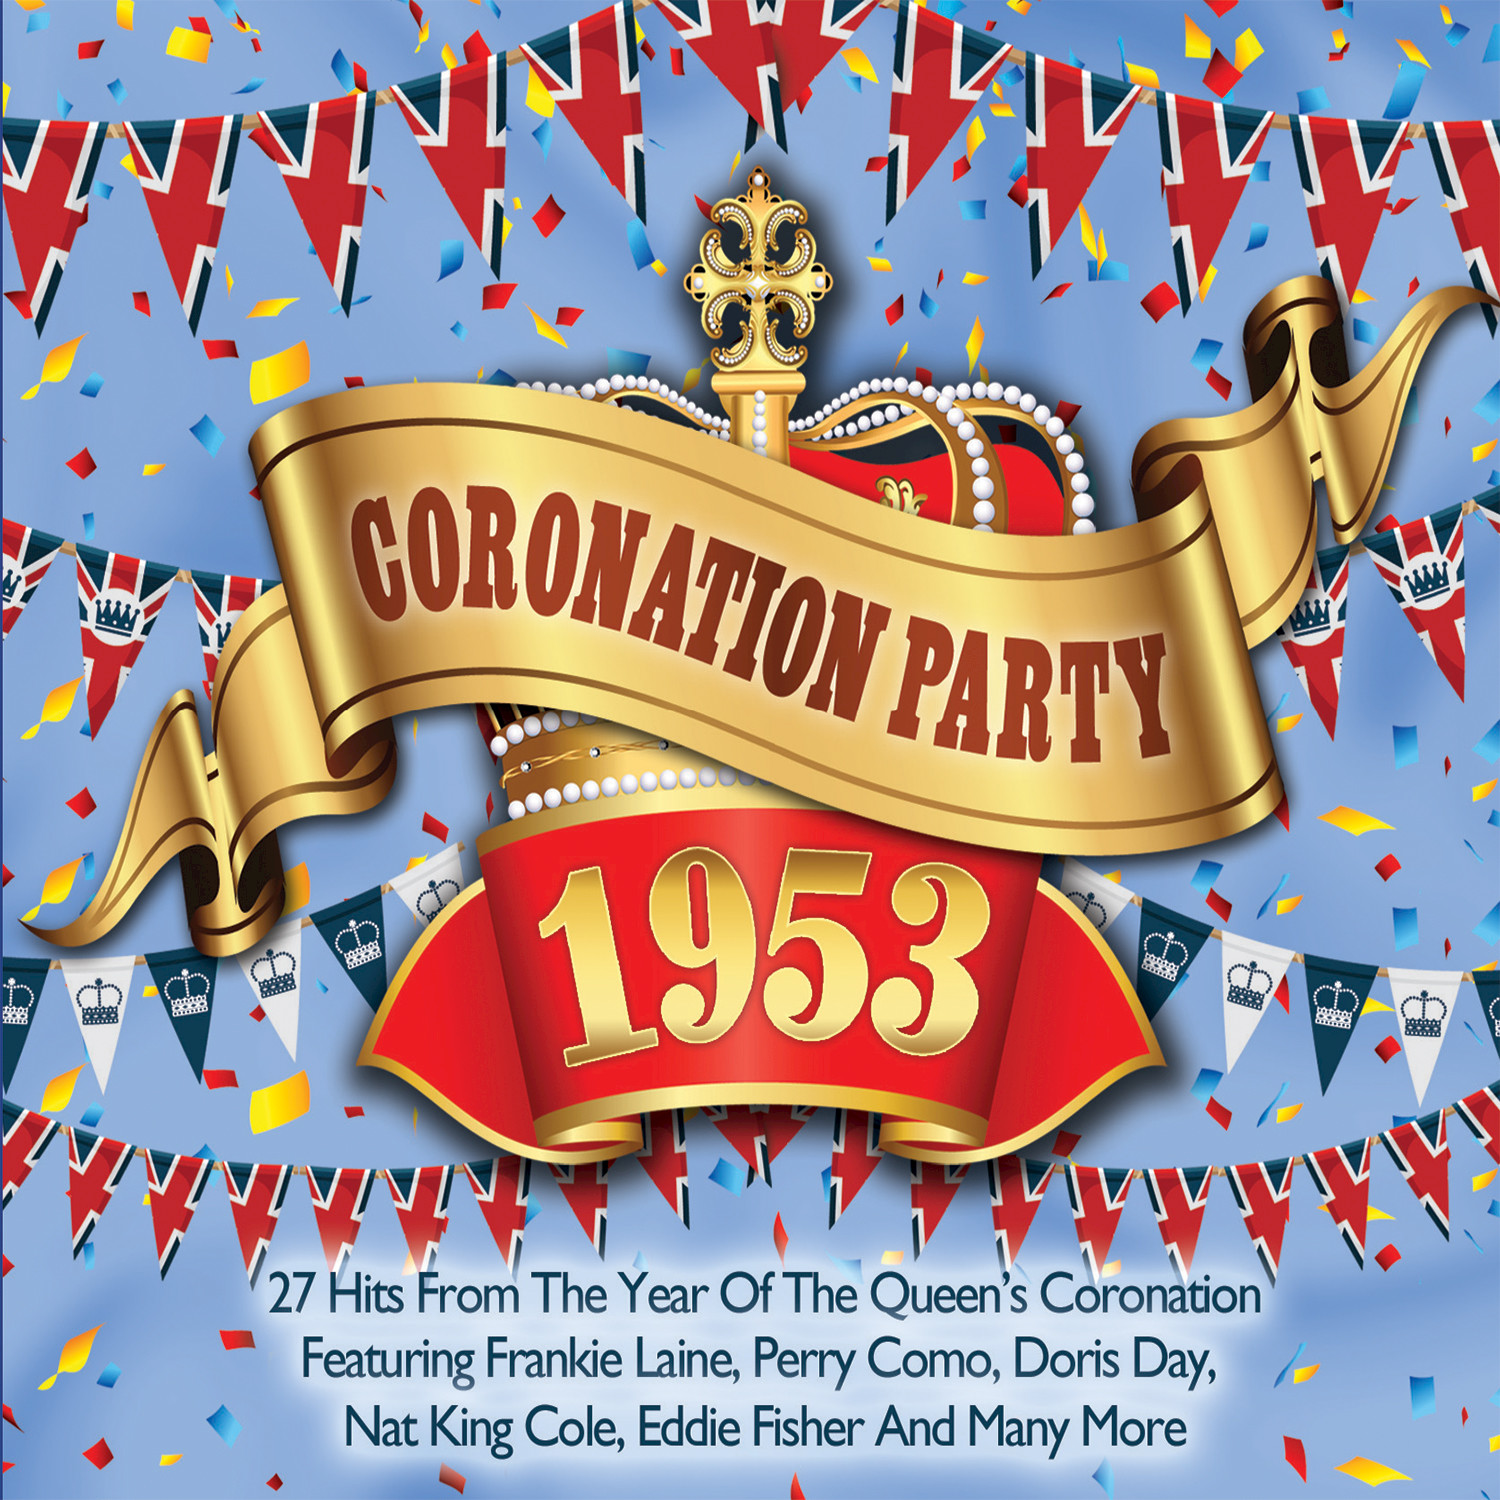 The Hits of 1953 – Coronation Party